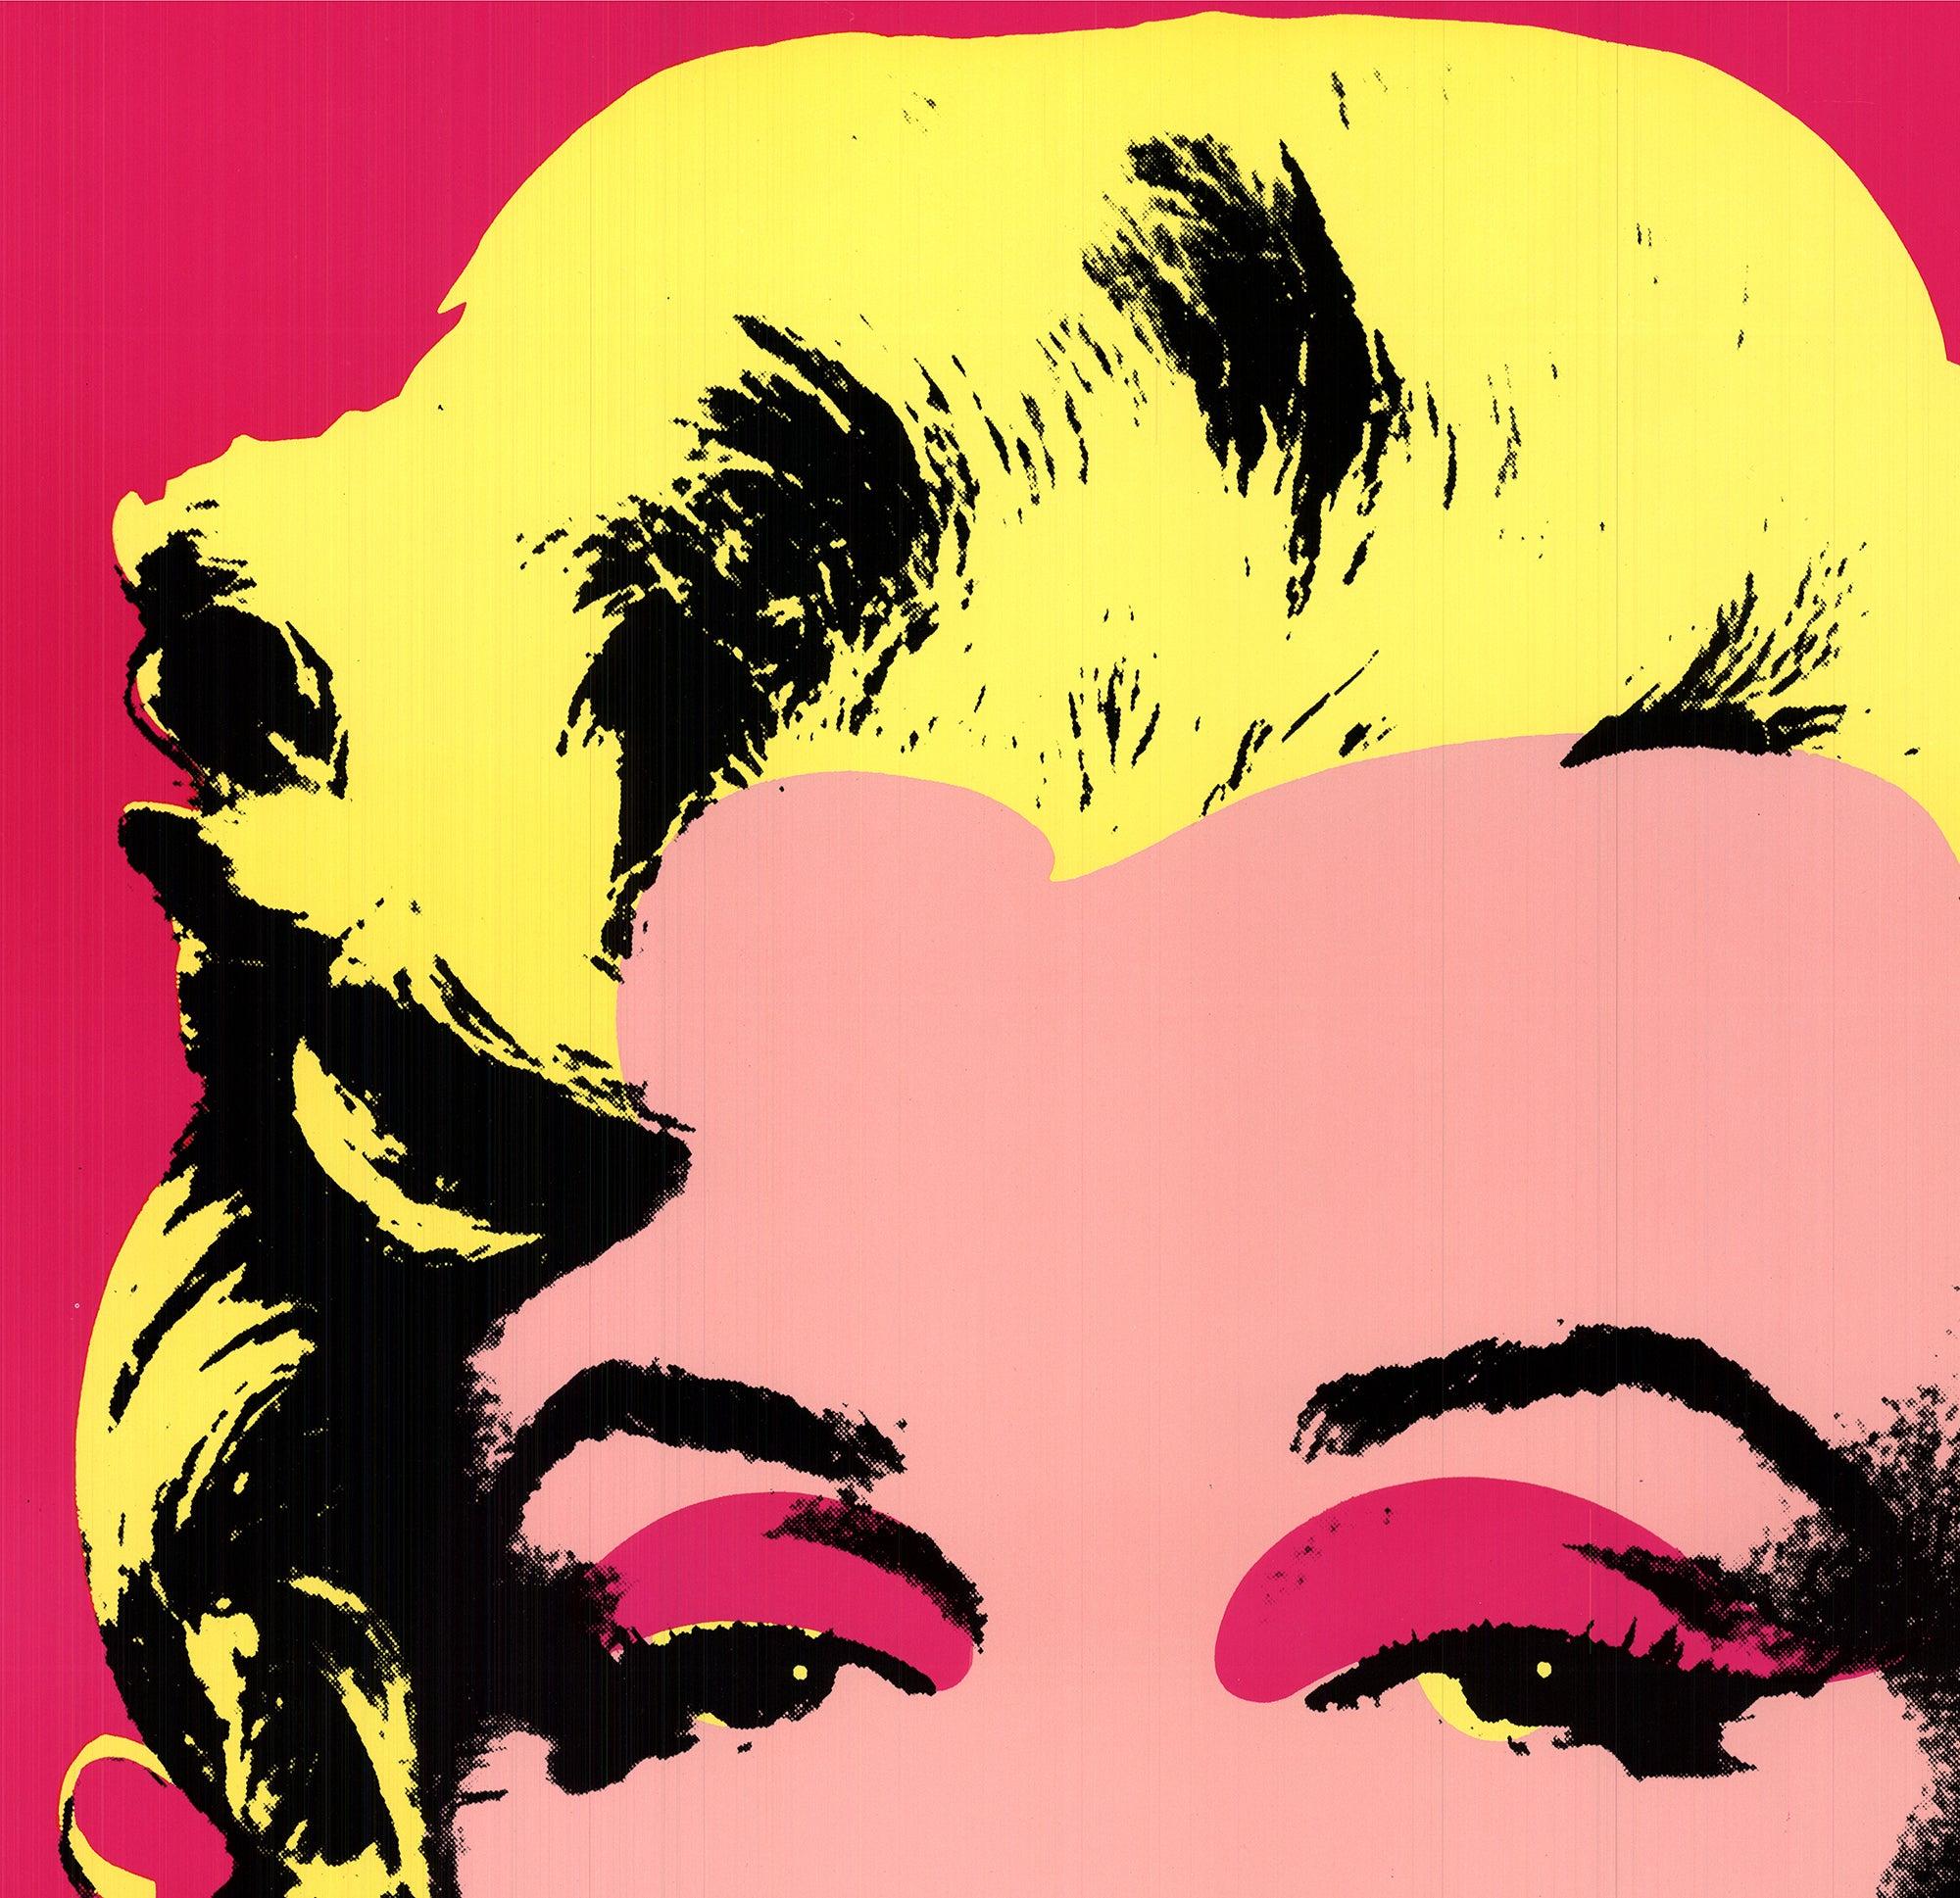 Andy Warhol « Marilyn Pink » 1987- Lithographie offset en vente 2